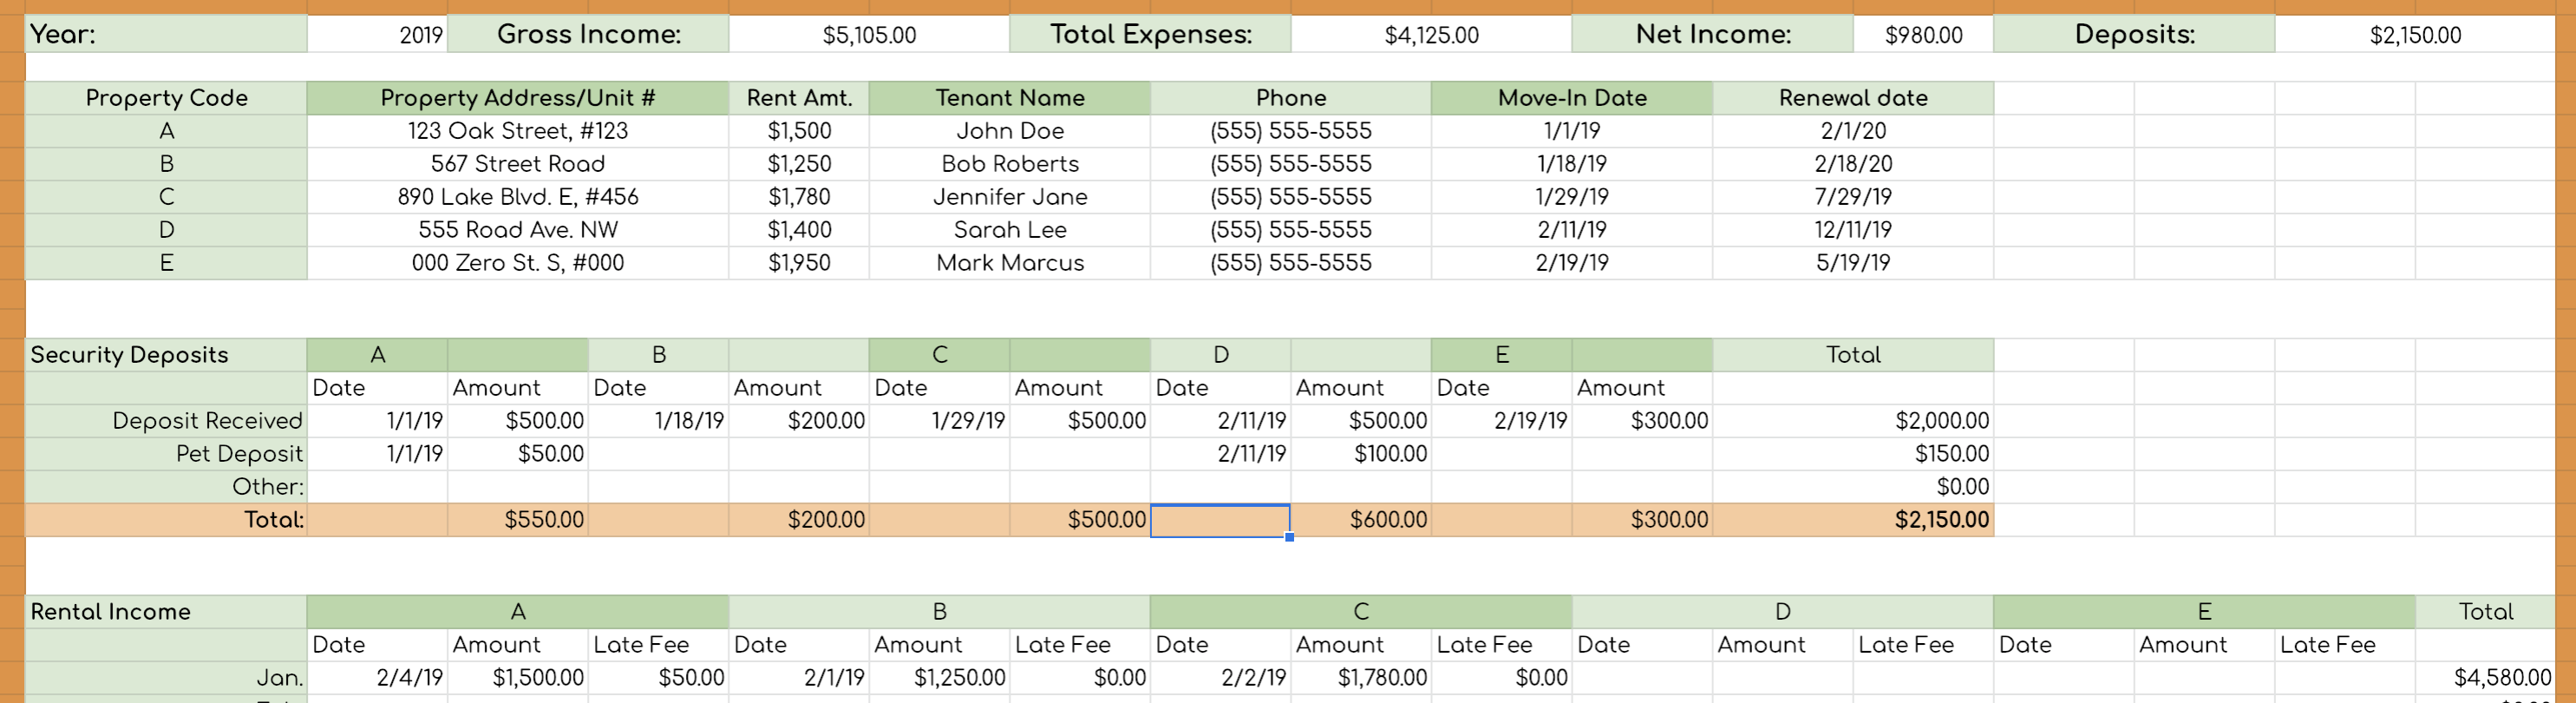 Rental Income and Expense Worksheet